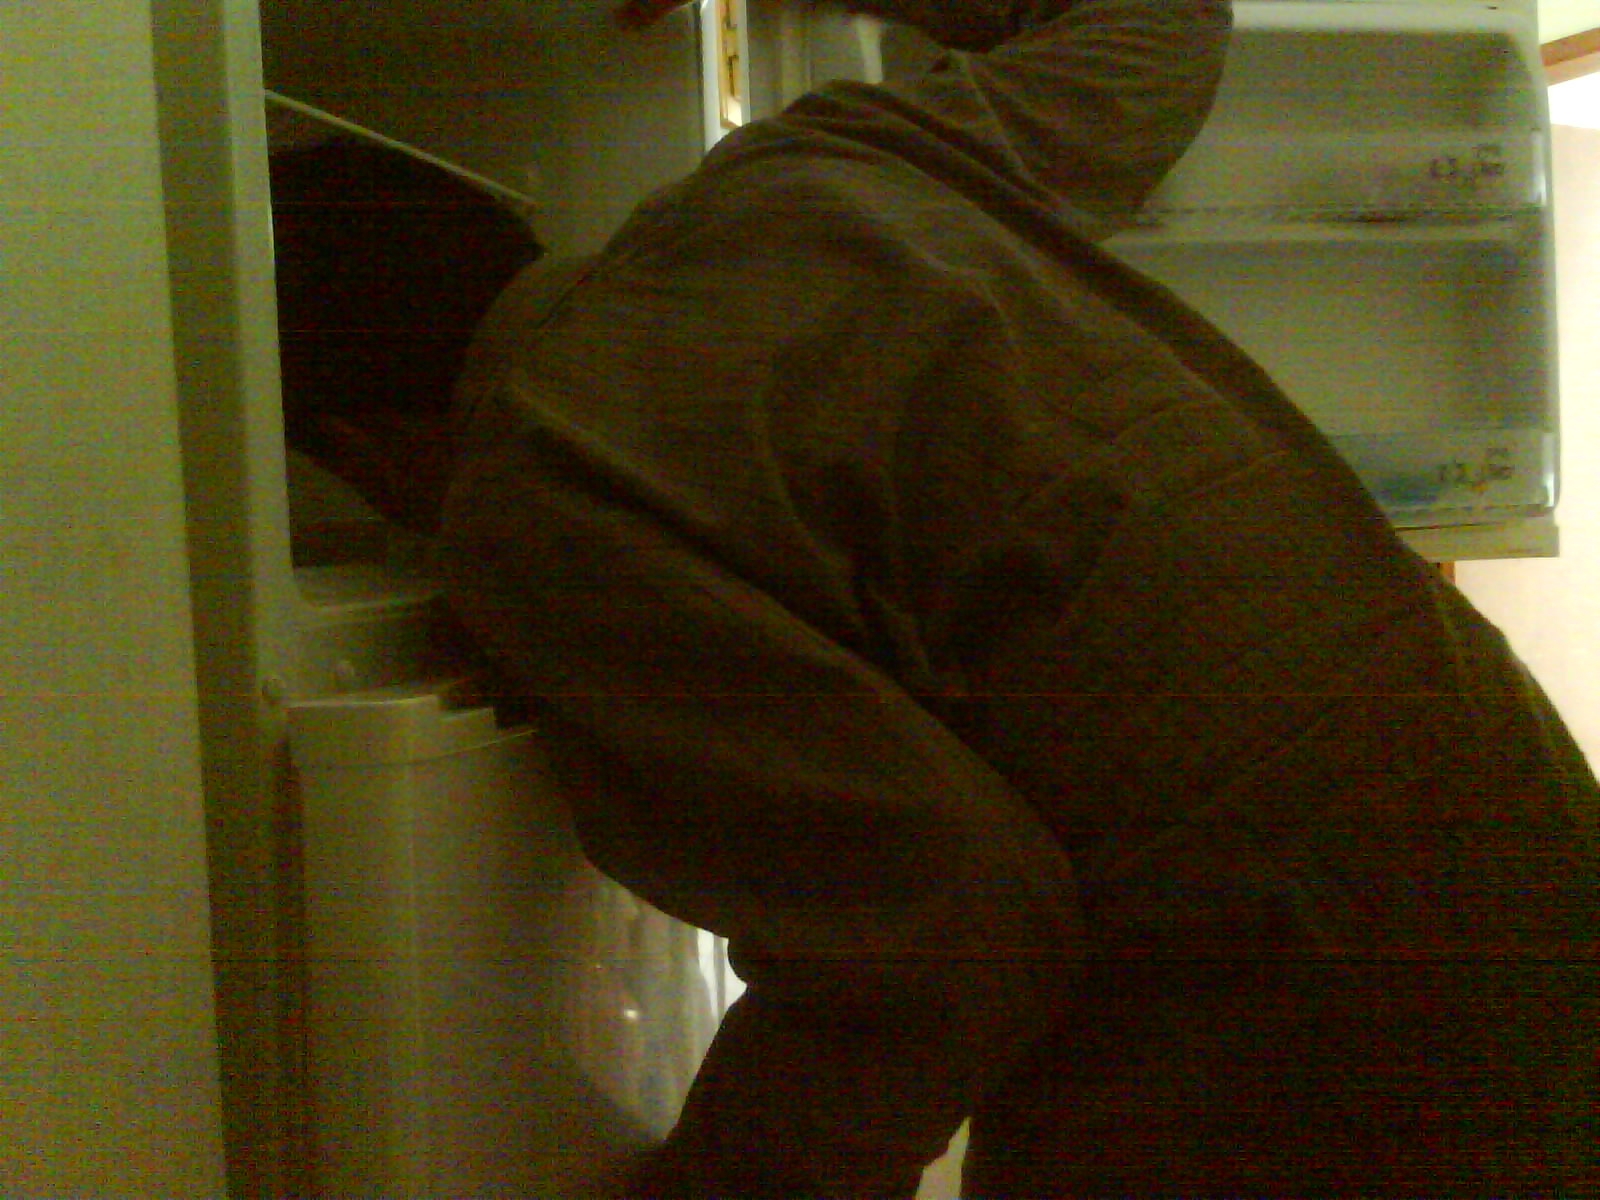 a person in an open doored refrigerator leaning against it